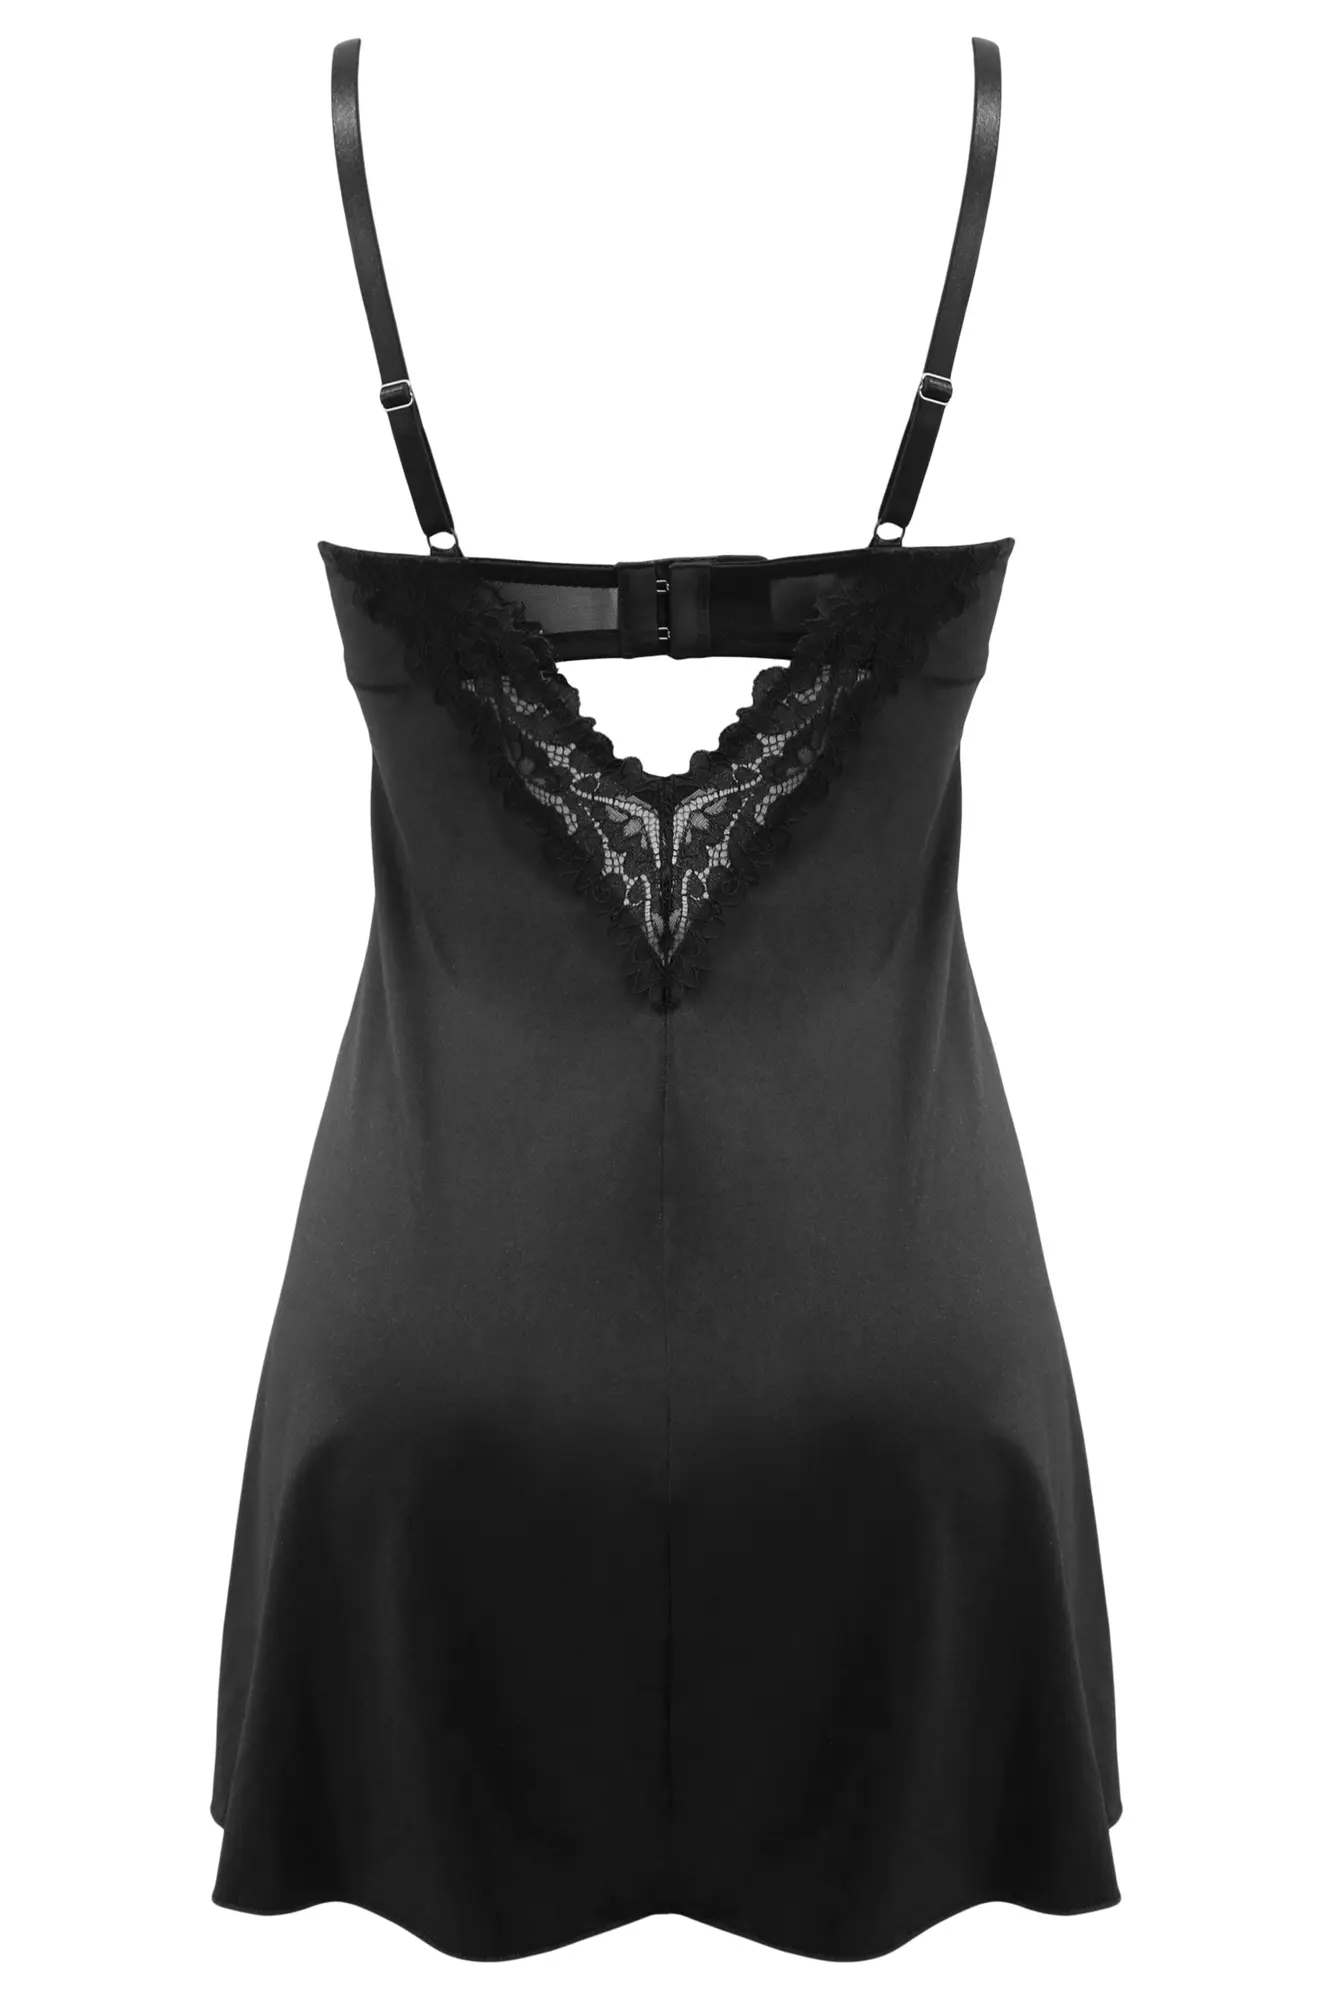 This bold chemise is perfect to wear - Curvaceous Lingerie